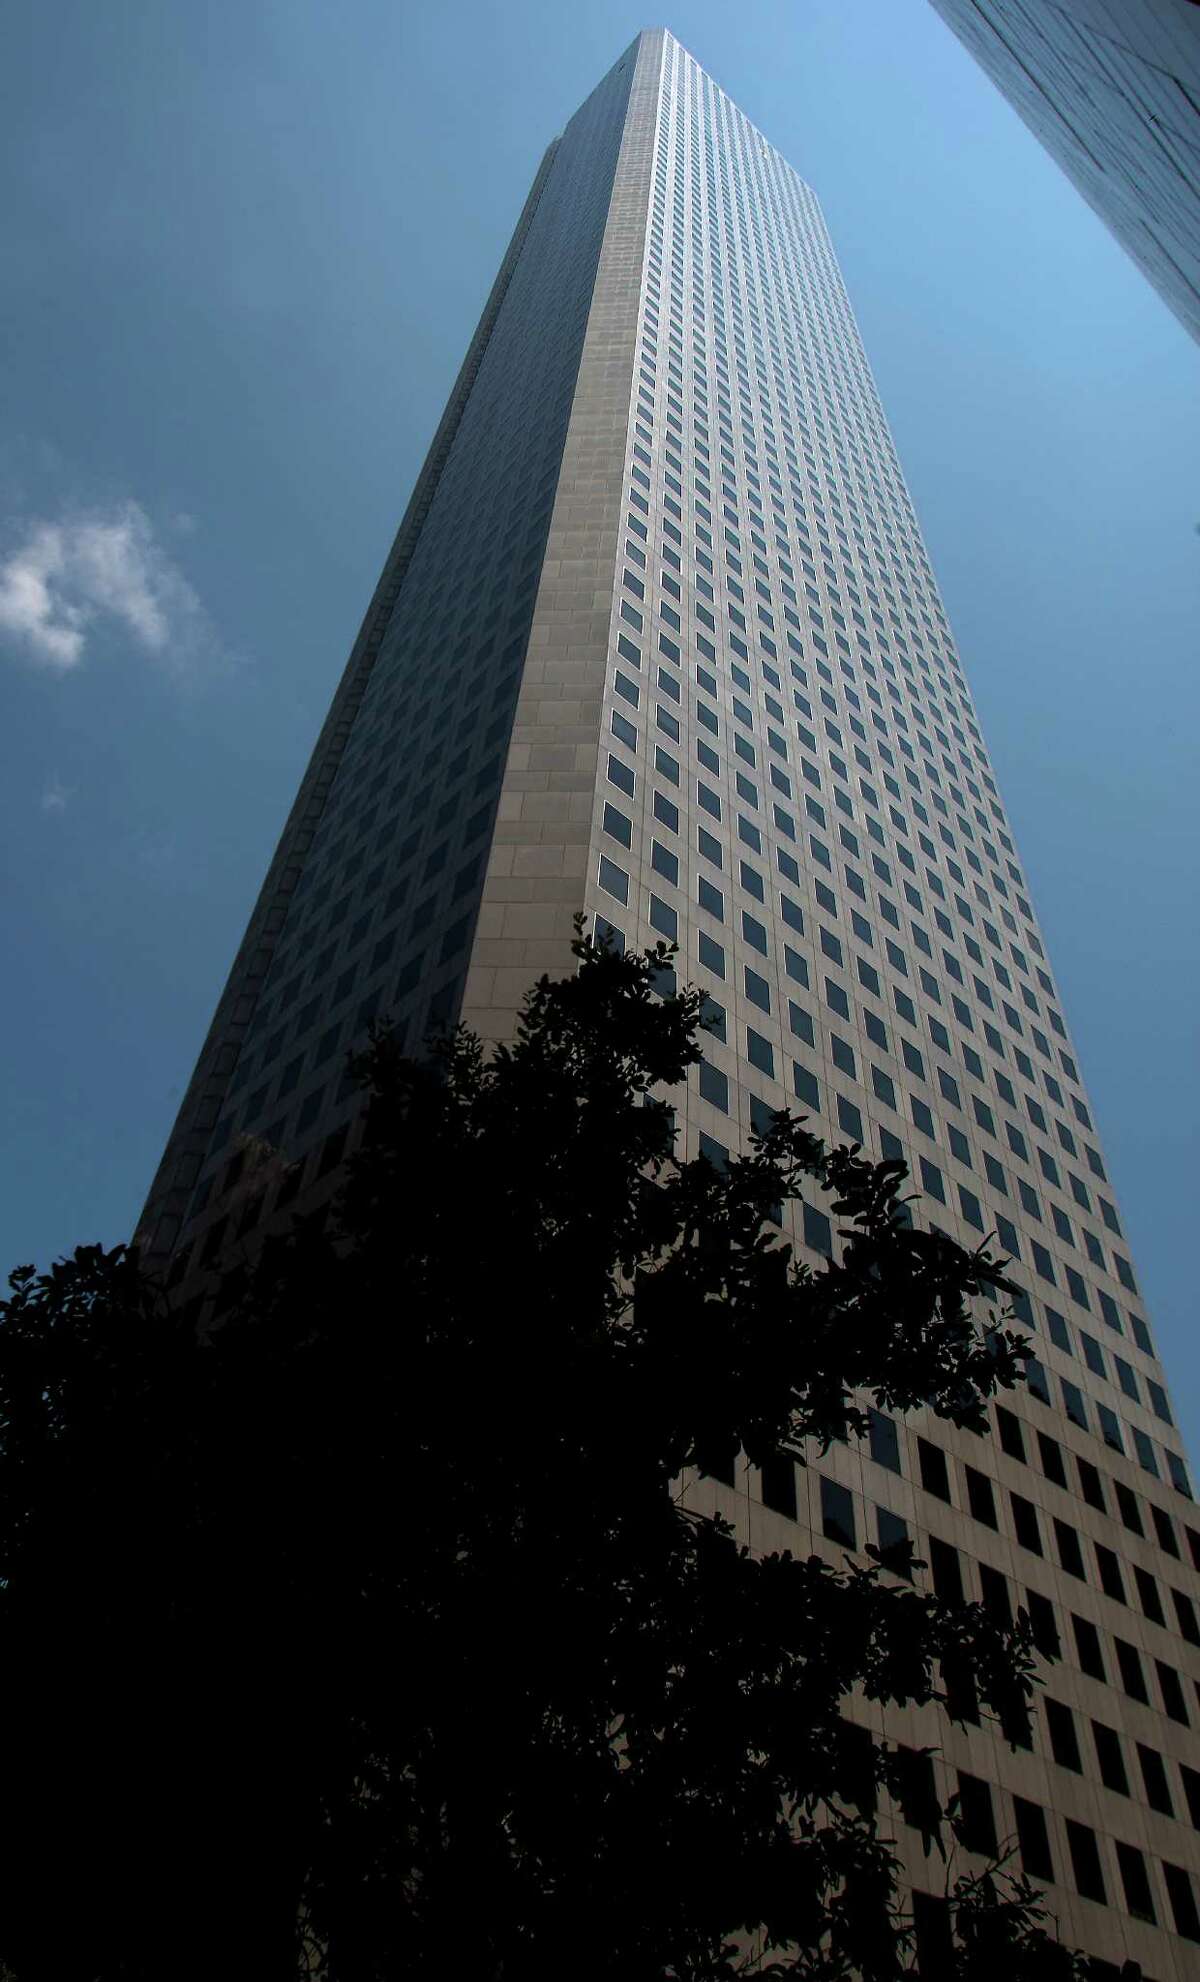 At 75 stories, JPMorgan Chase Tower stands 1,002 feet tall. It was built in 1981. ﻿